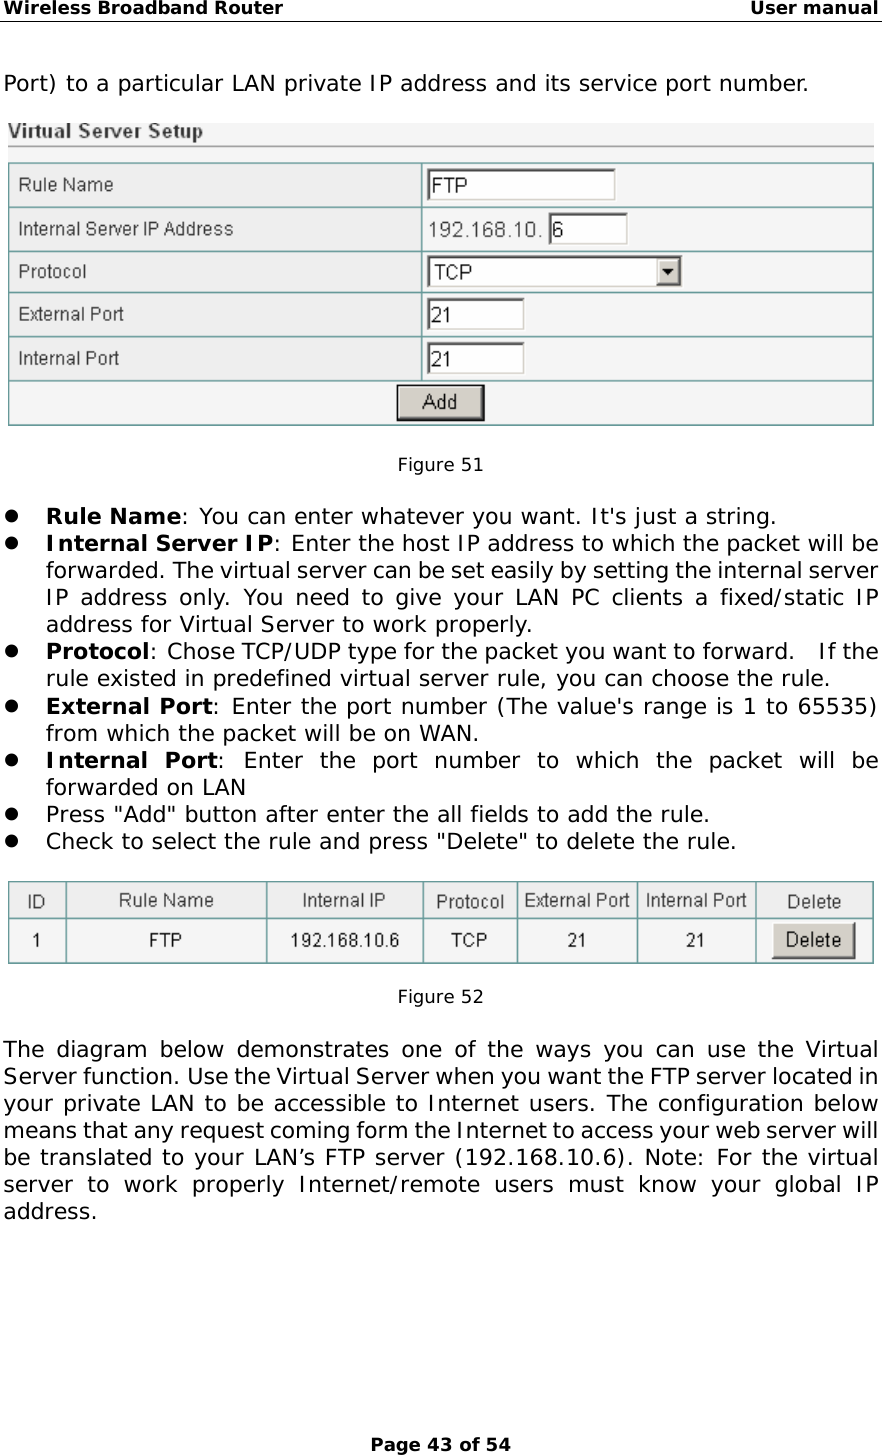 Wireless Broadband Router                                                   User manual Page 43 of 54 Port) to a particular LAN private IP address and its service port number.     Figure 51  z Rule Name: You can enter whatever you want. It&apos;s just a string. z Internal Server IP: Enter the host IP address to which the packet will be forwarded. The virtual server can be set easily by setting the internal server IP address only. You need to give your LAN PC clients a fixed/static IP address for Virtual Server to work properly. z Protocol: Chose TCP/UDP type for the packet you want to forward.   If the rule existed in predefined virtual server rule, you can choose the rule. z External Port: Enter the port number (The value&apos;s range is 1 to 65535) from which the packet will be on WAN. z Internal Port: Enter the port number to which the packet will be forwarded on LAN z Press &quot;Add&quot; button after enter the all fields to add the rule. z Check to select the rule and press &quot;Delete&quot; to delete the rule.    Figure 52  The diagram below demonstrates one of the ways you can use the Virtual Server function. Use the Virtual Server when you want the FTP server located in your private LAN to be accessible to Internet users. The configuration below means that any request coming form the Internet to access your web server will be translated to your LAN’s FTP server (192.168.10.6). Note: For the virtual server to work properly Internet/remote users must know your global IP address. 